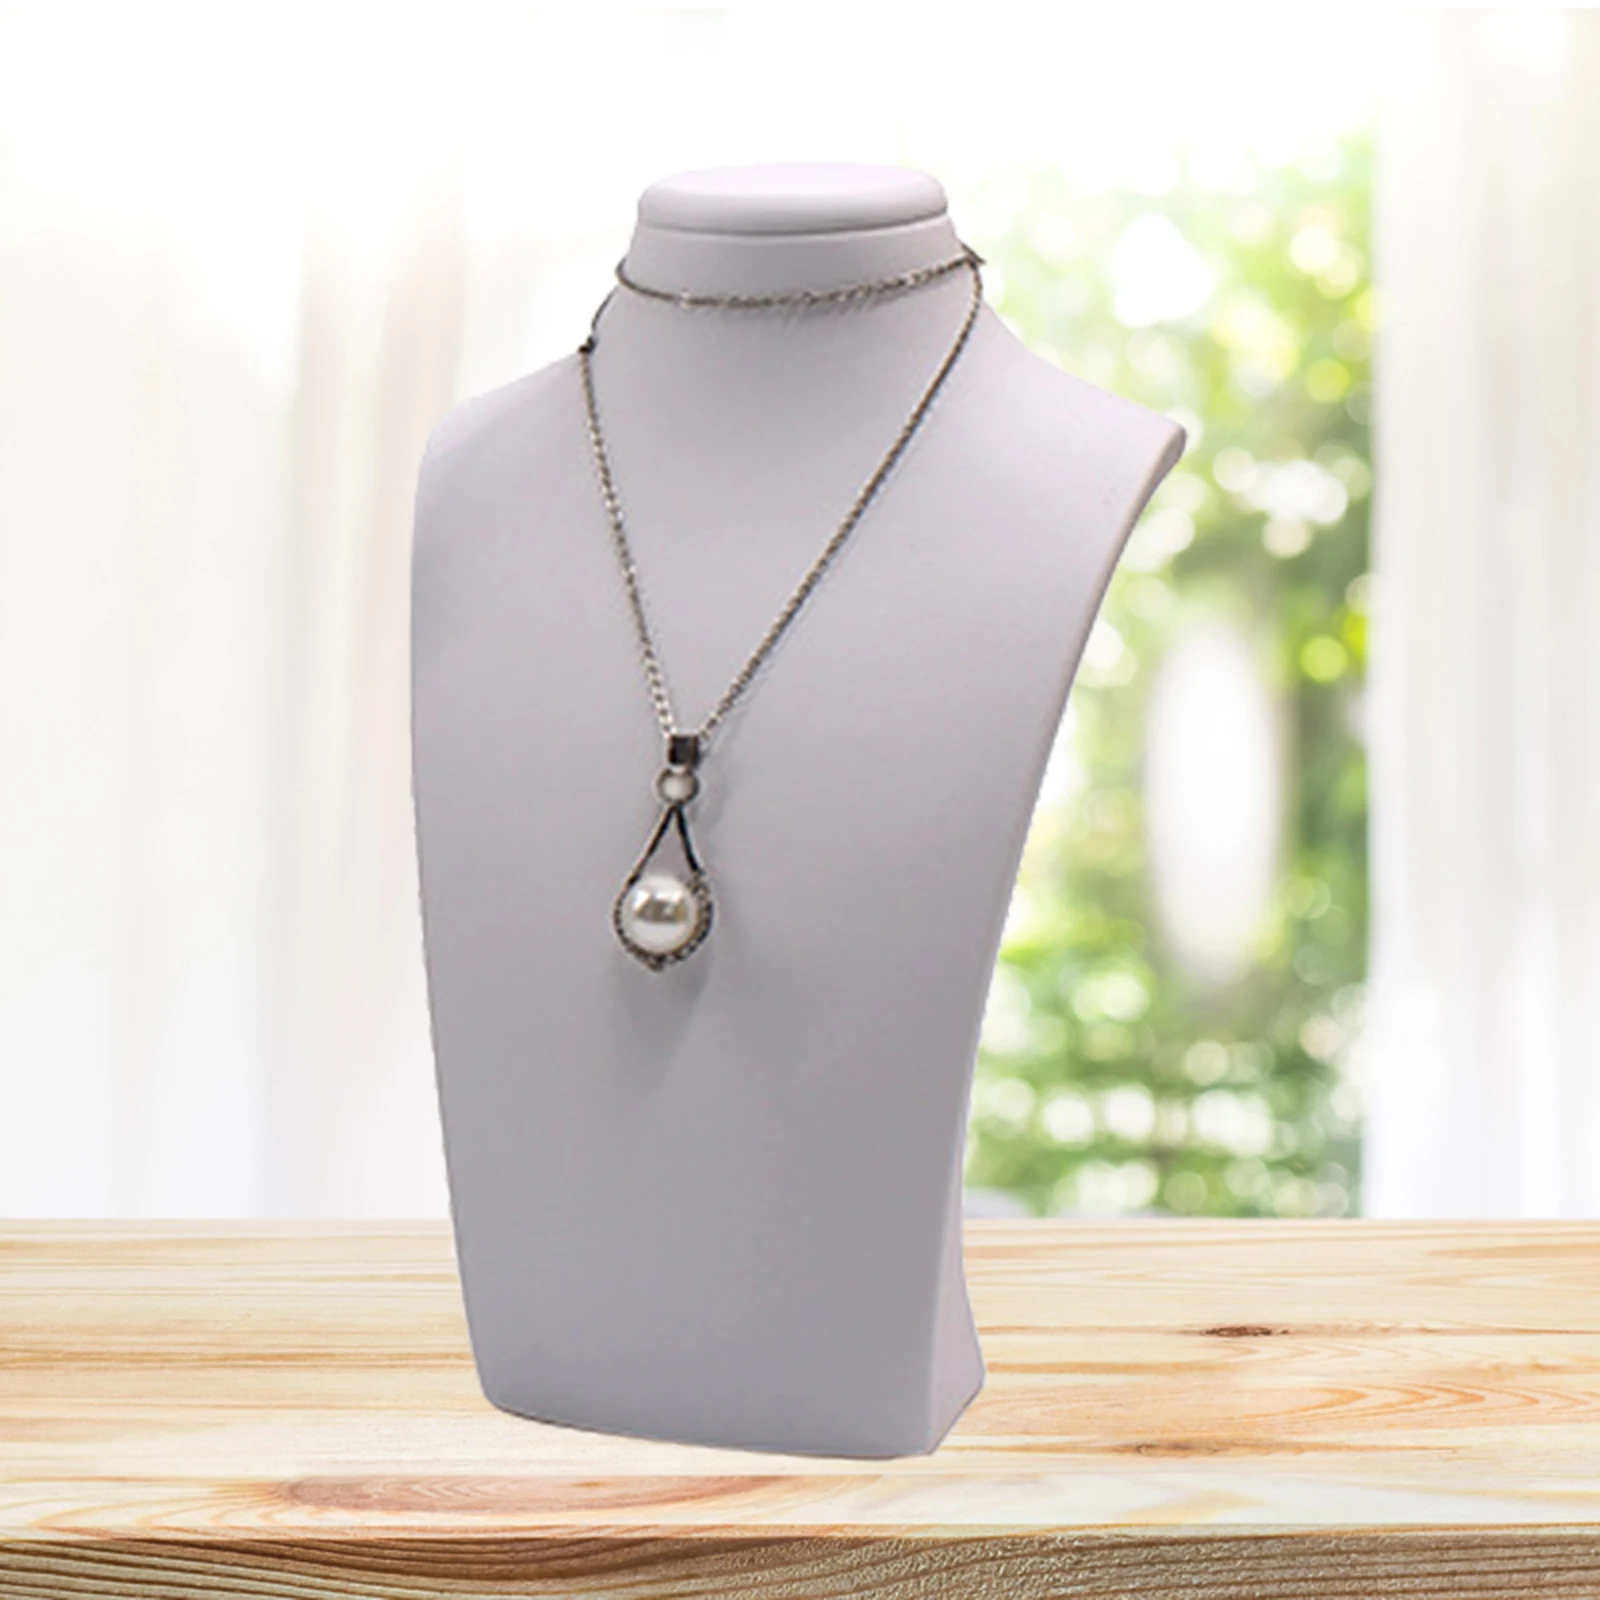 Mannequin Jewelry Necklace Display Model Holder Neck Bust Stand Showcase Show Decorate Womens Necklace Showcase Display Shelf